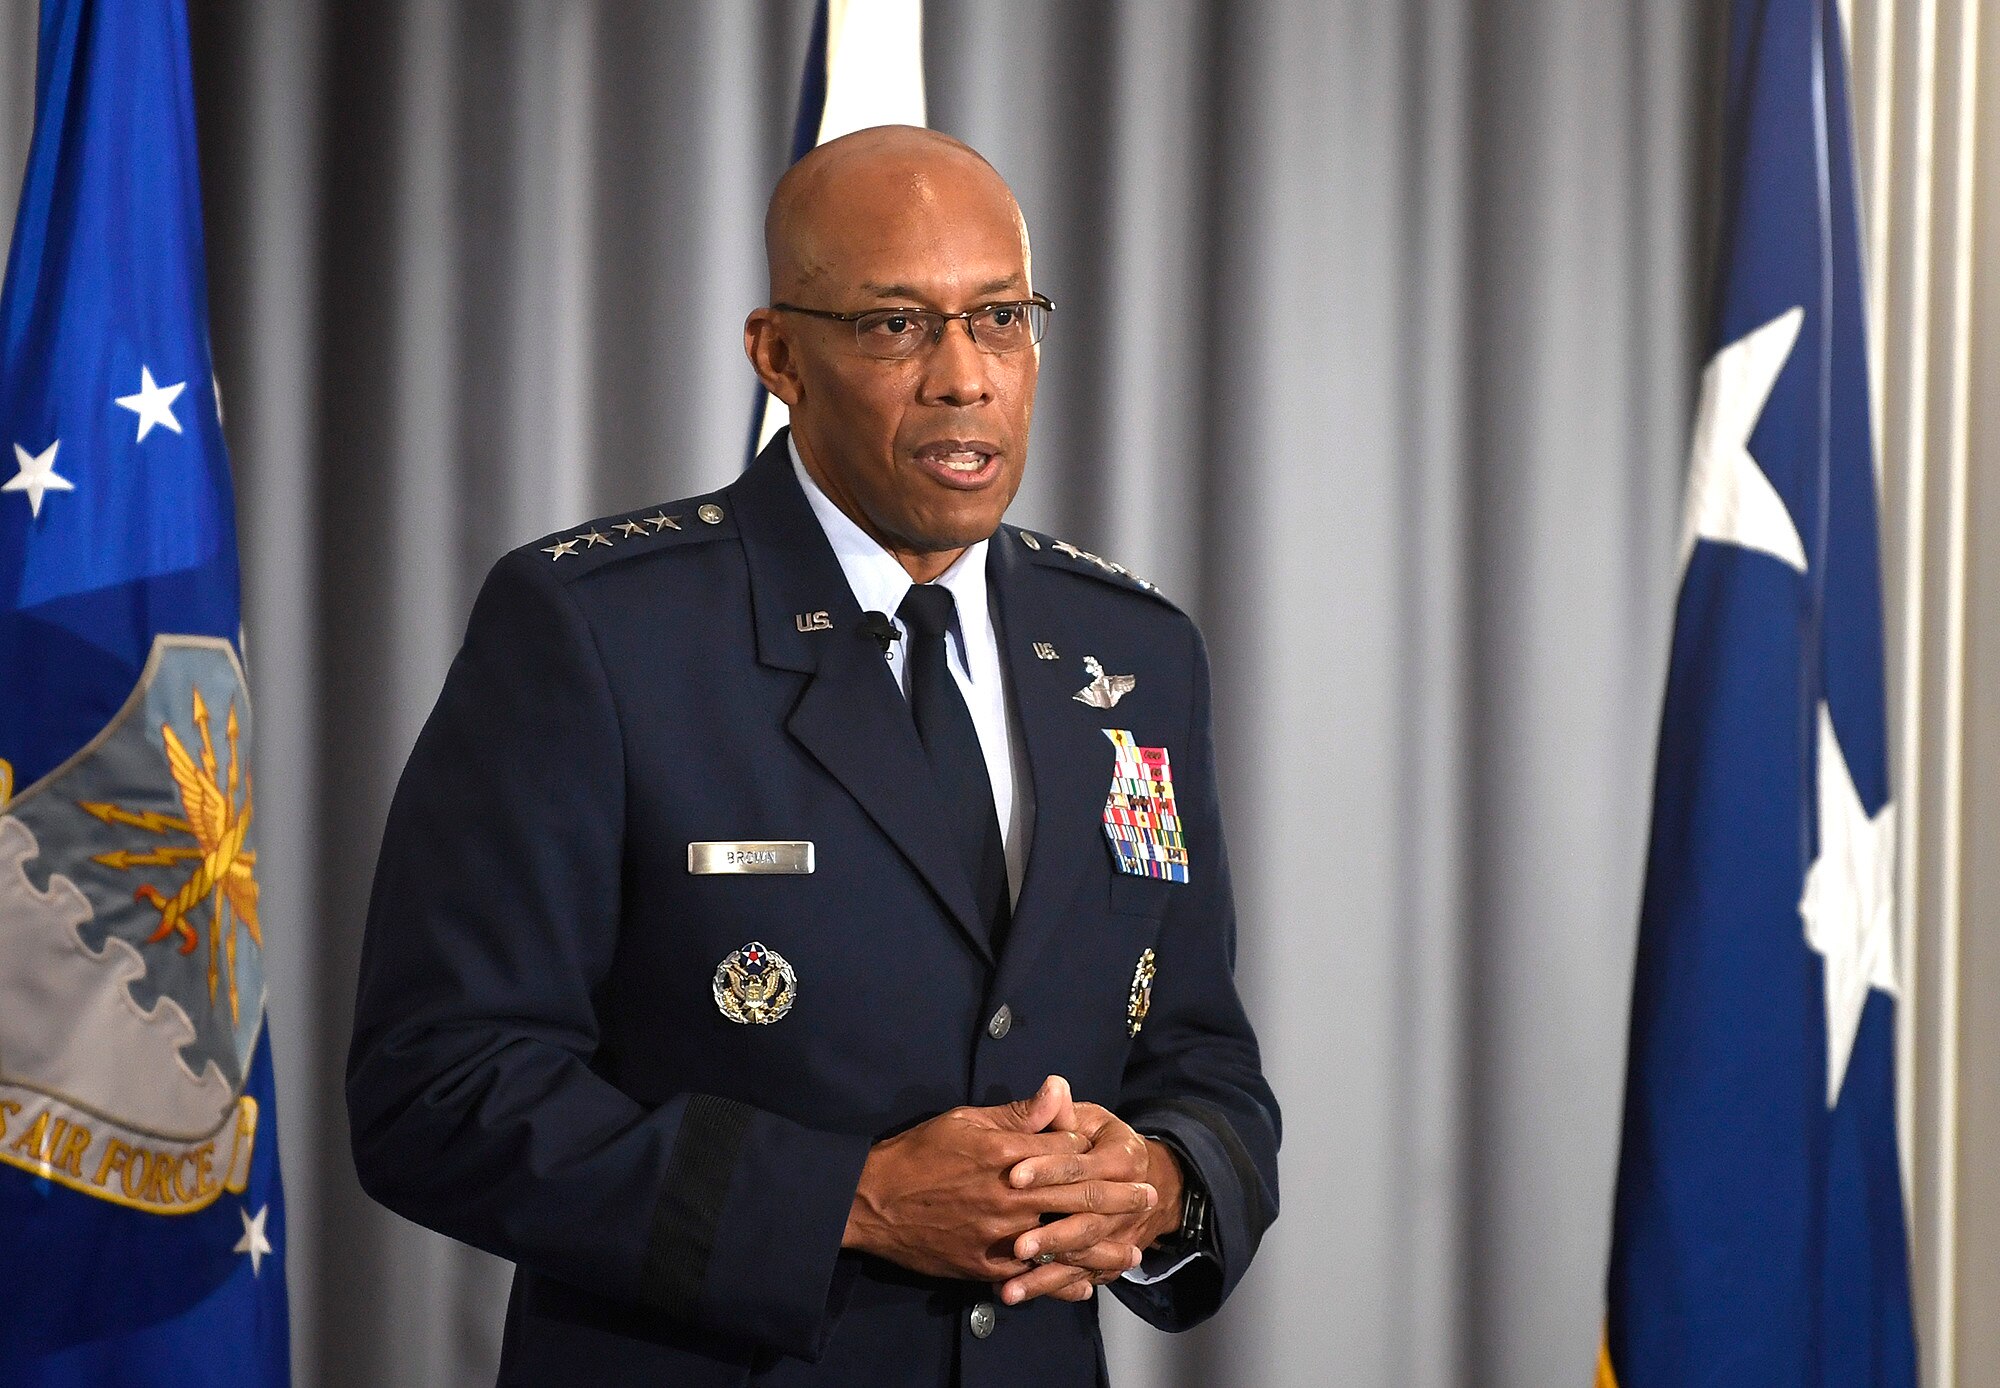 Air Force Chief of Staff Gen. Charles Q. Brown, Jr. addresses the audience during Gen. David Allvin's promotion ceremony at Joint Base Anacostia-Bolling, Washington, D.C., Nov. 12, 2020. Allvin will serve as the 40th Vice Chief of Staff of the Air Force. (U.S. Air Force Photo by Andy Morataya)